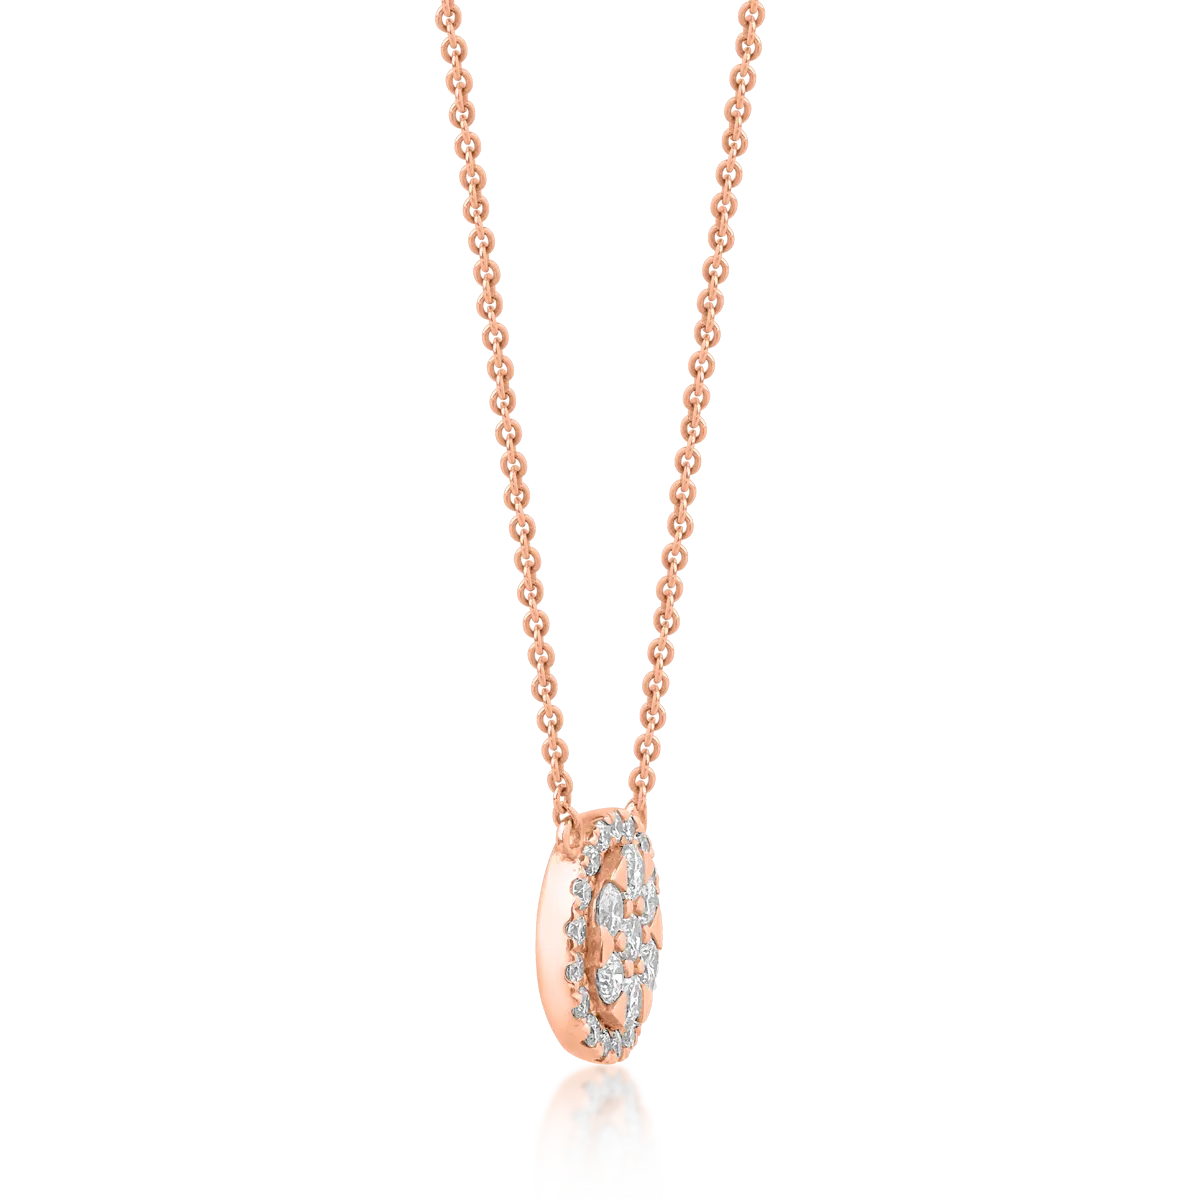 14K rose gold pendant chain with 0.41ct diamonds